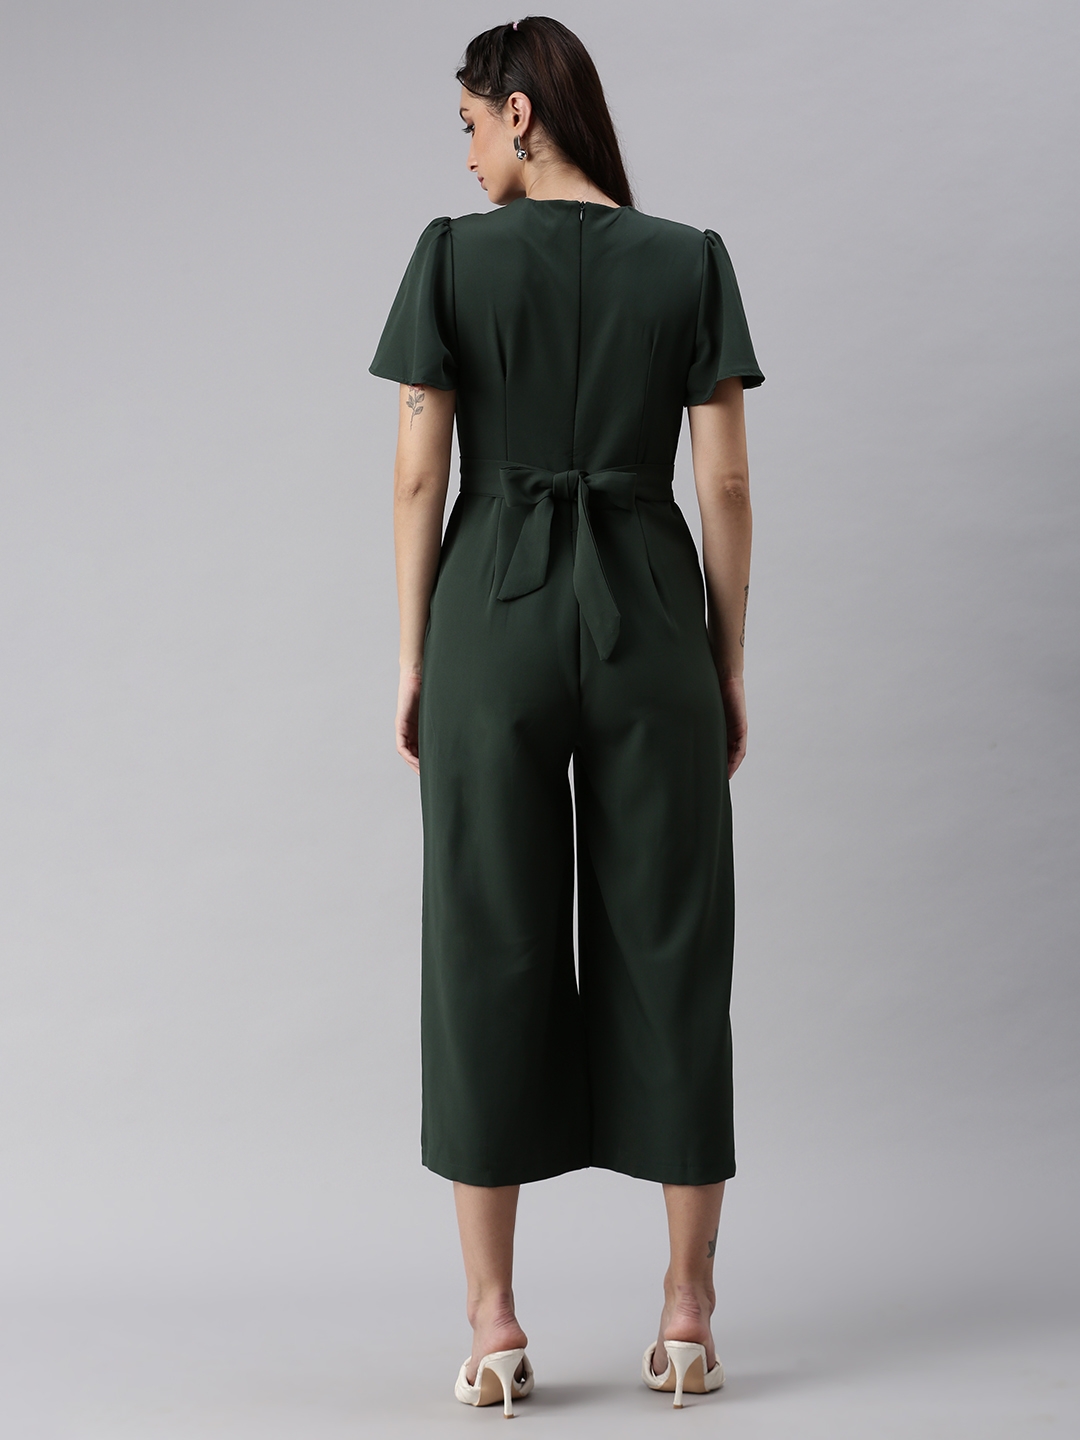 Women's Green Polyester Solid Jumpsuits